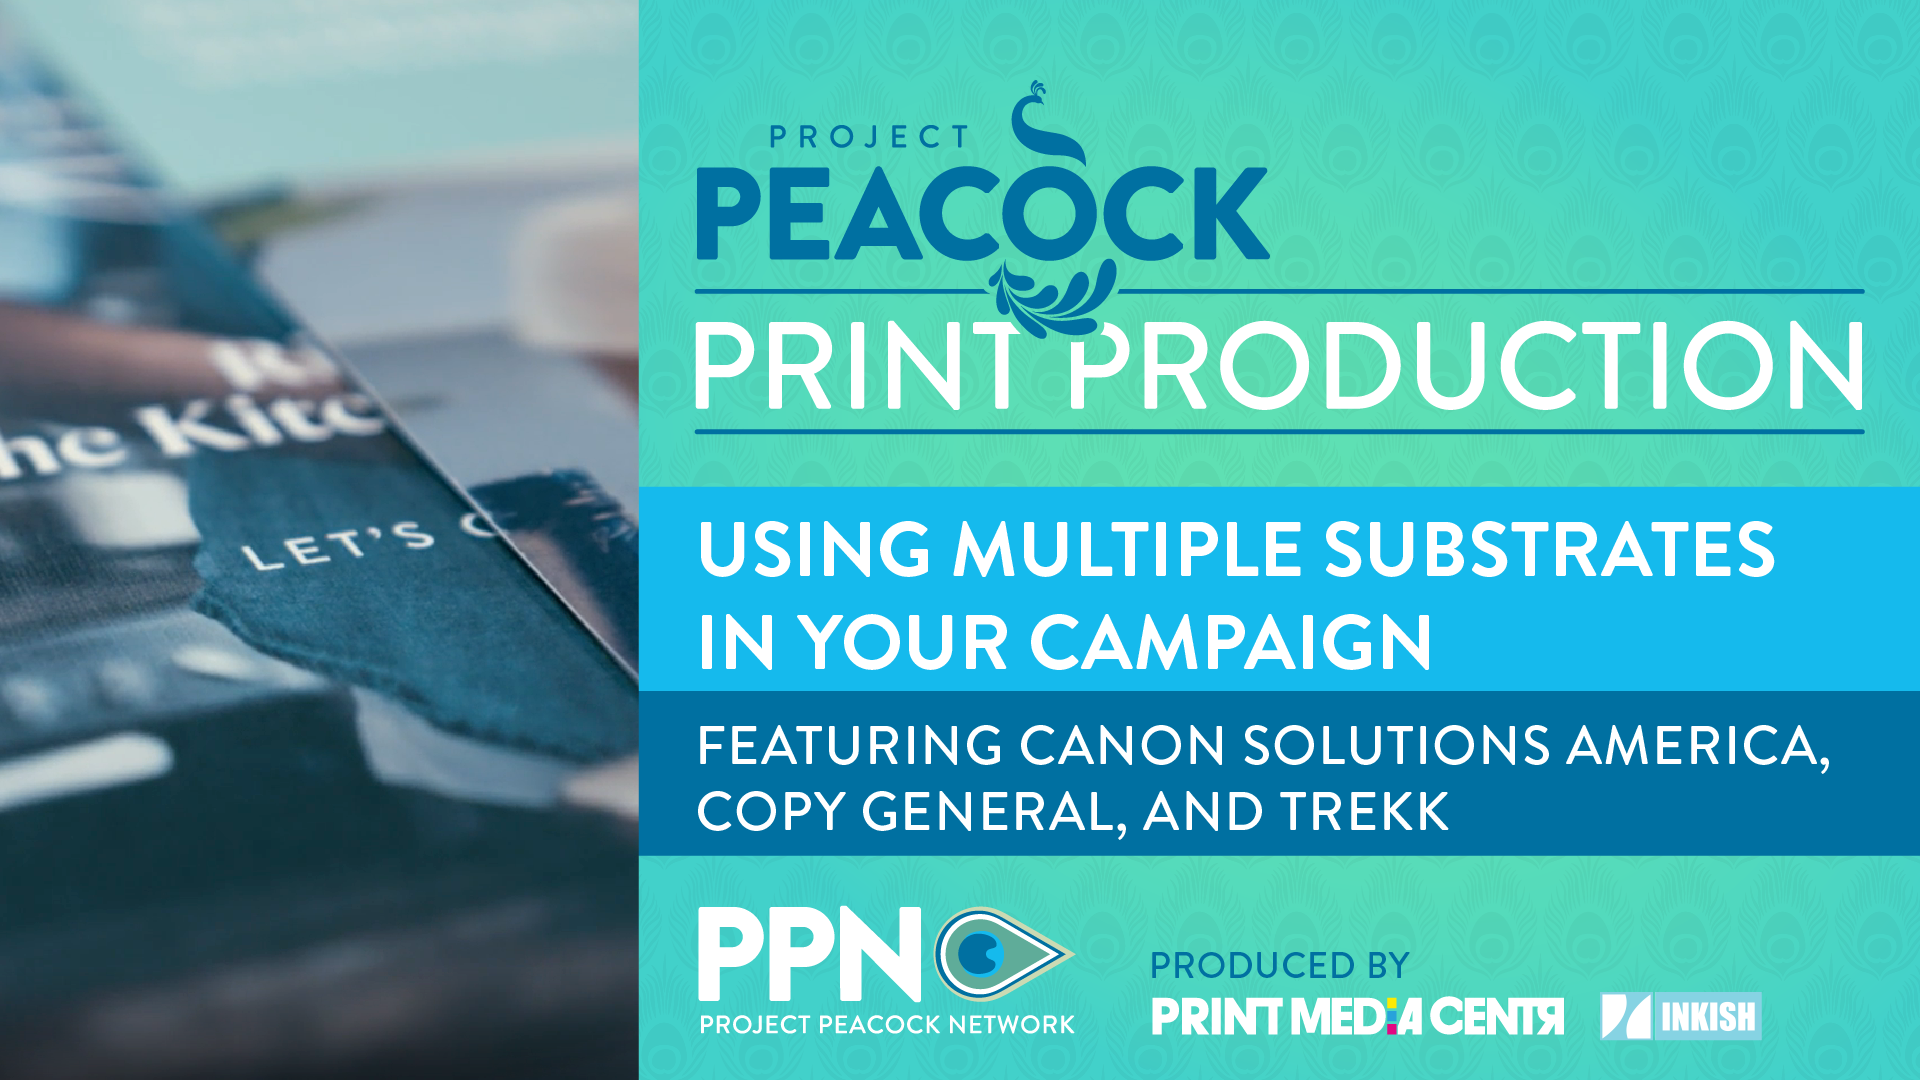 Video Thumbnail for Project Peacock. Print Production video title Using Multiple Substrates in your campaign to the right. A photo of the corner of a brichure with a few pages is on the left of the thumbnail